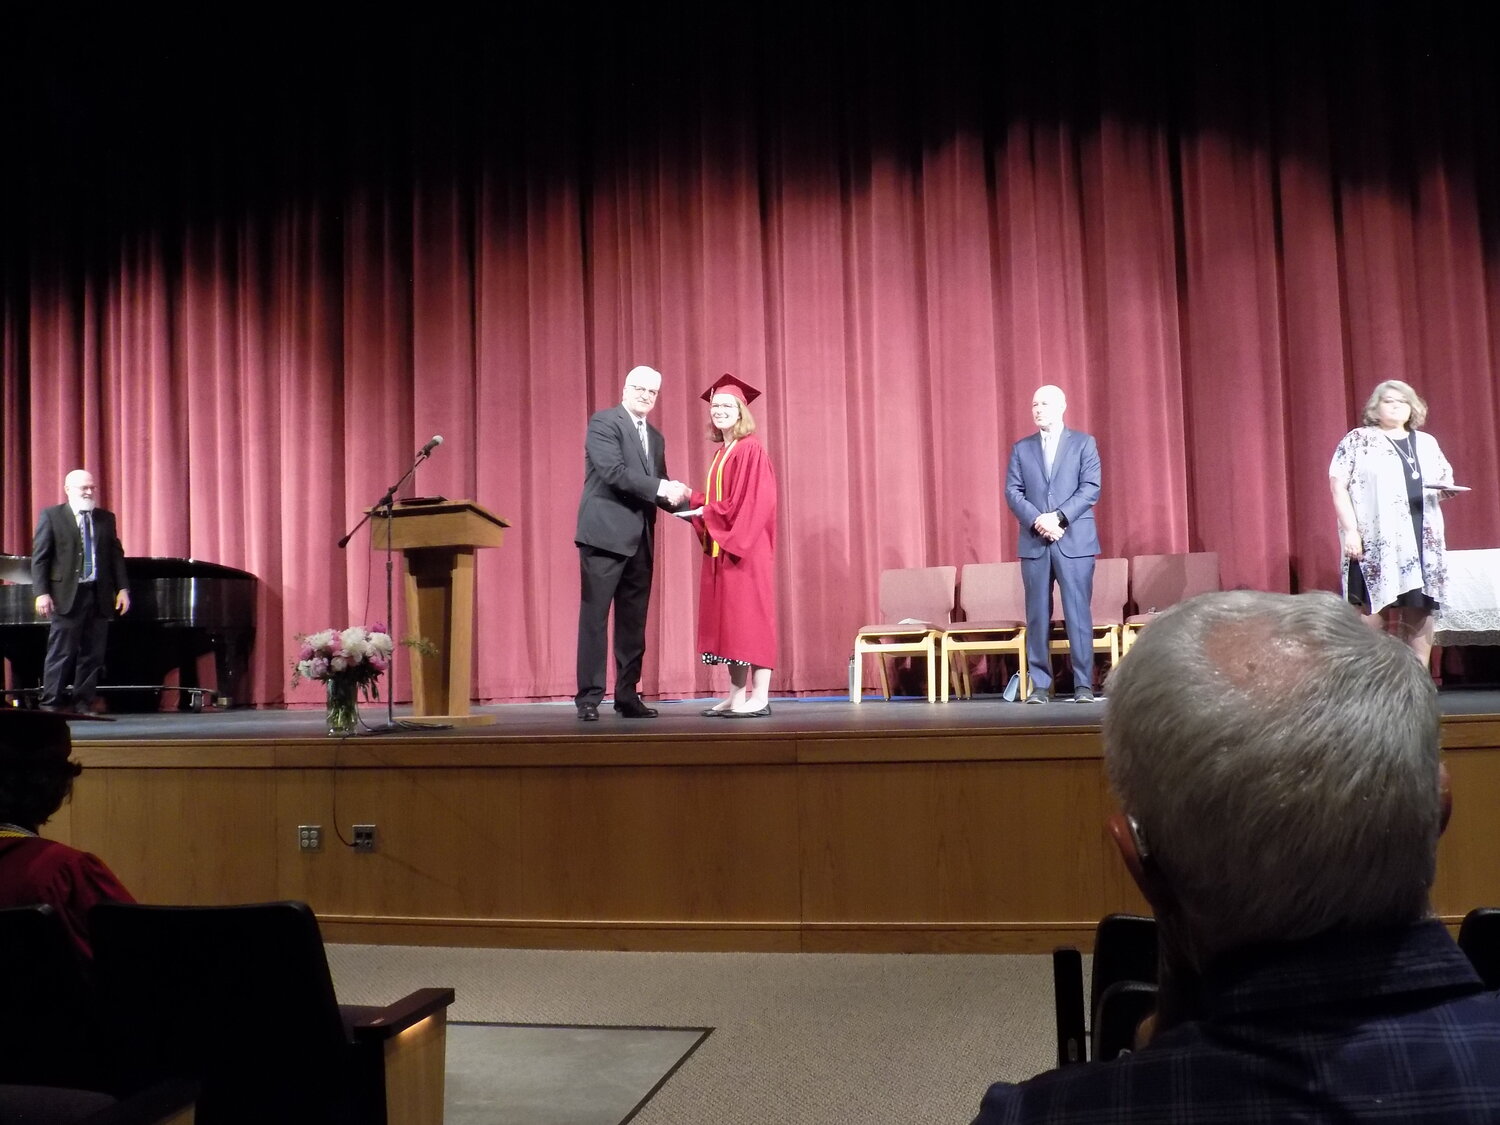 Rebecca Farrier receives her diploma.